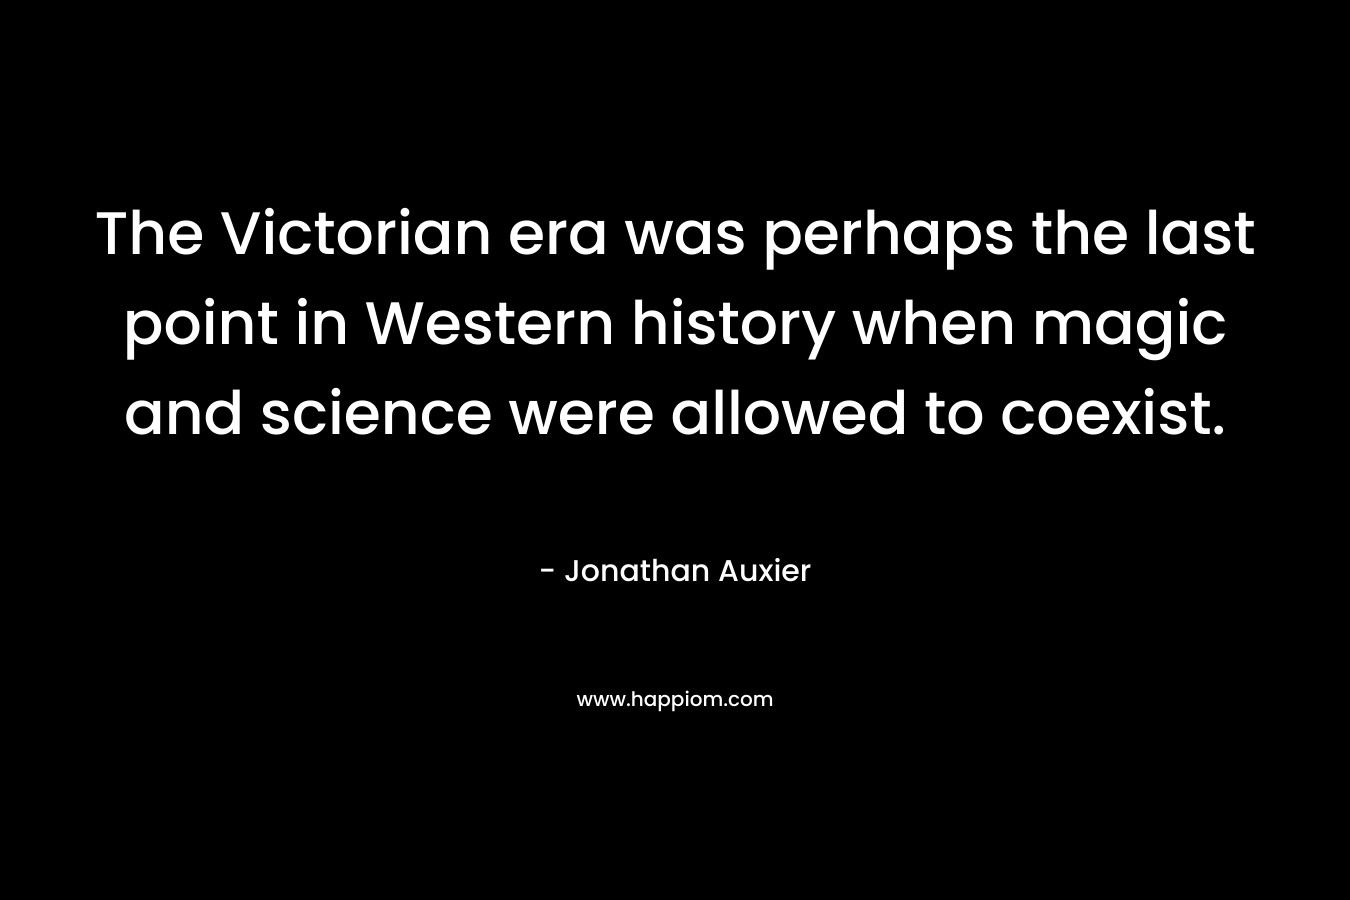 The Victorian era was perhaps the last point in Western history when magic and science were allowed to coexist.